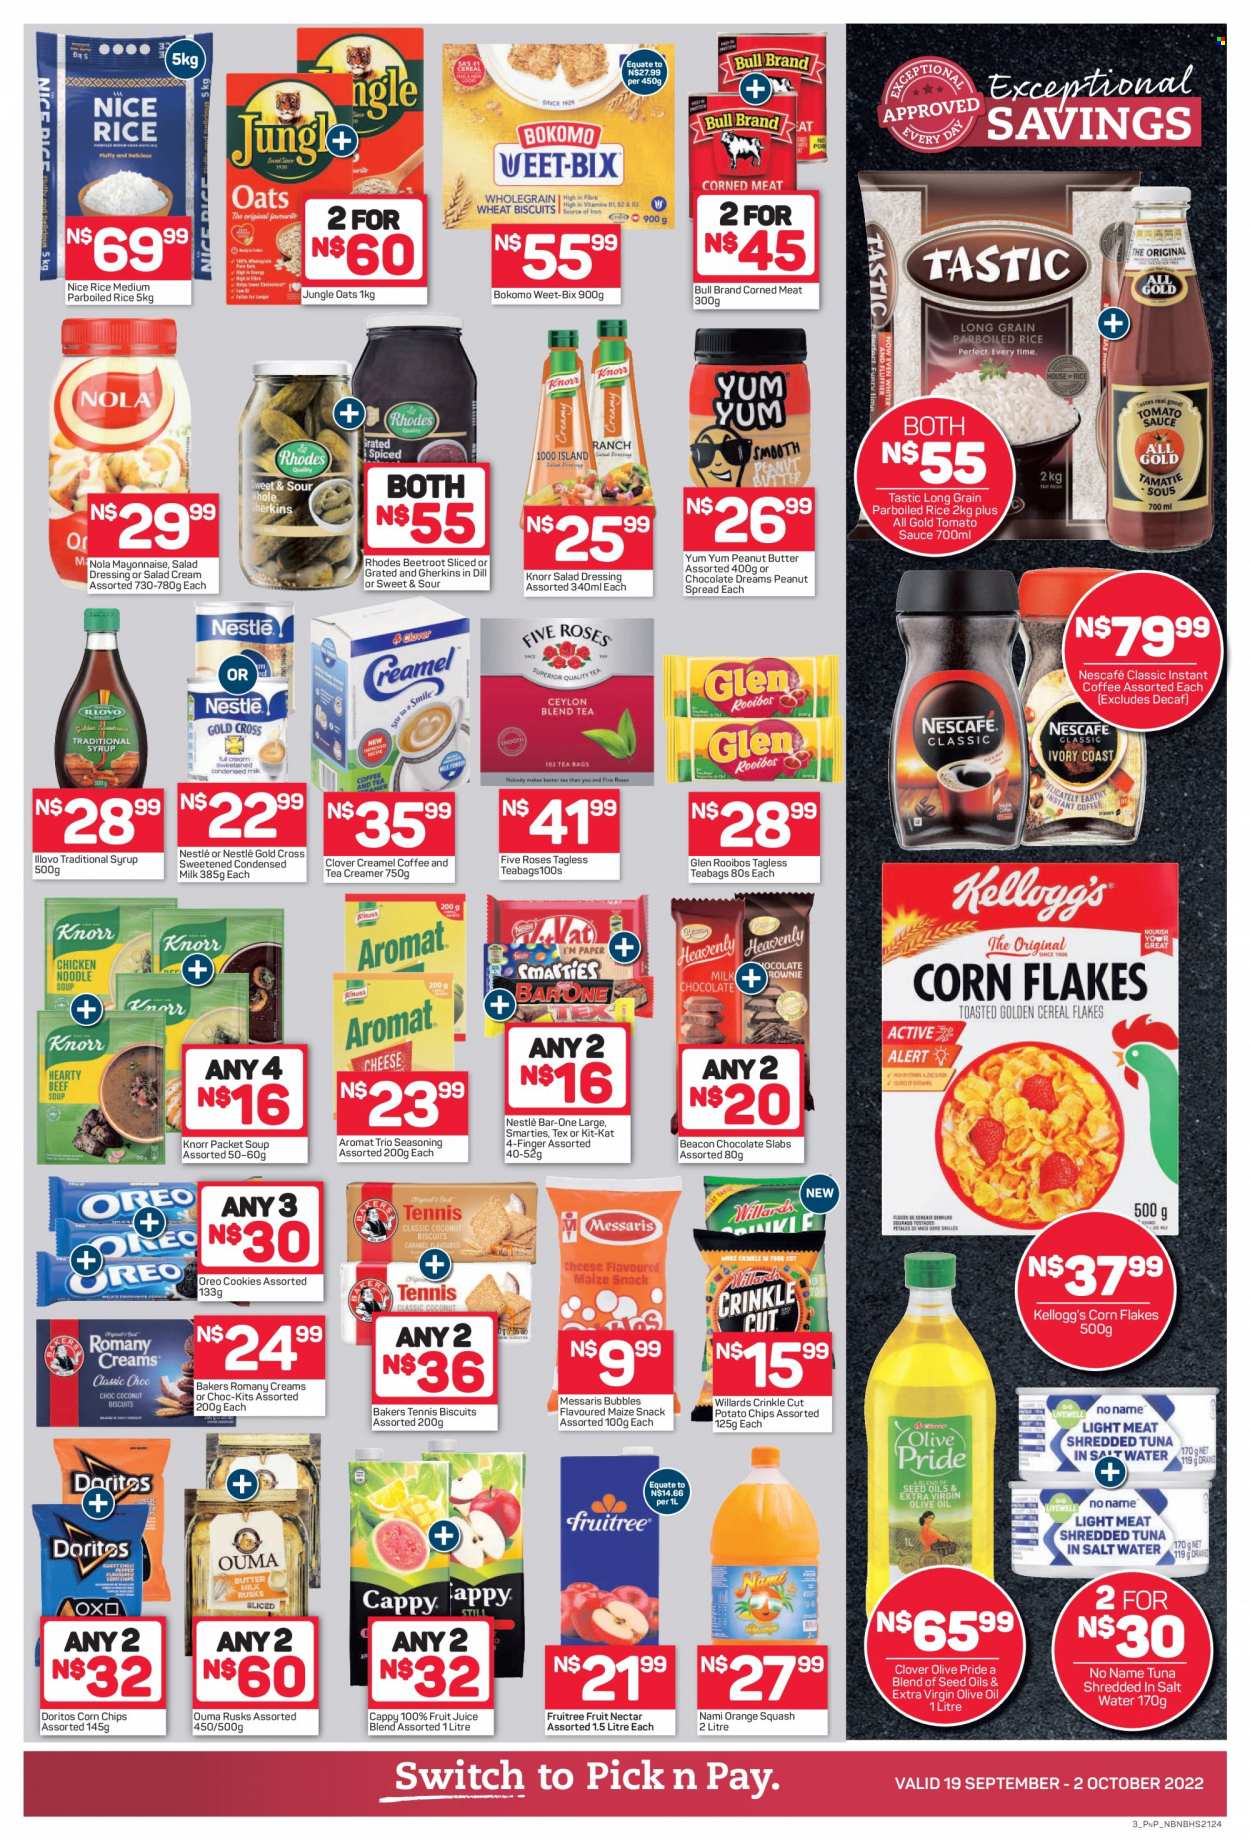 Pick n Pay catalogue  - 19/09/2022 - 02/10/2022 - Sales products - rusks, beetroot, tuna, No Name, soup, Knorr, sauce, Oreo, Clover, milk, condensed milk, creamer, coffee and tea creamer, salad cream, cookies, Nestlé, chocolate, snack, chocolate slabs, Smarties, cereal bar, Kellogg's, biscuit, Doritos, potato chips, chips, corn chips, maize snack, oats, tomato sauce, corned meat, corn flakes, Weet-Bix, jungle oats, rice, parboiled rice, Tastic, dill, spice, salad dressing, dressing, extra virgin olive oil, olive oil, oil, peanut butter, syrup, switch, fruit juice, juice, fruit nectar, orange squash, tea, tea bags, rooibos tea, instant coffee, Nescafé, Bakers. Page 4.